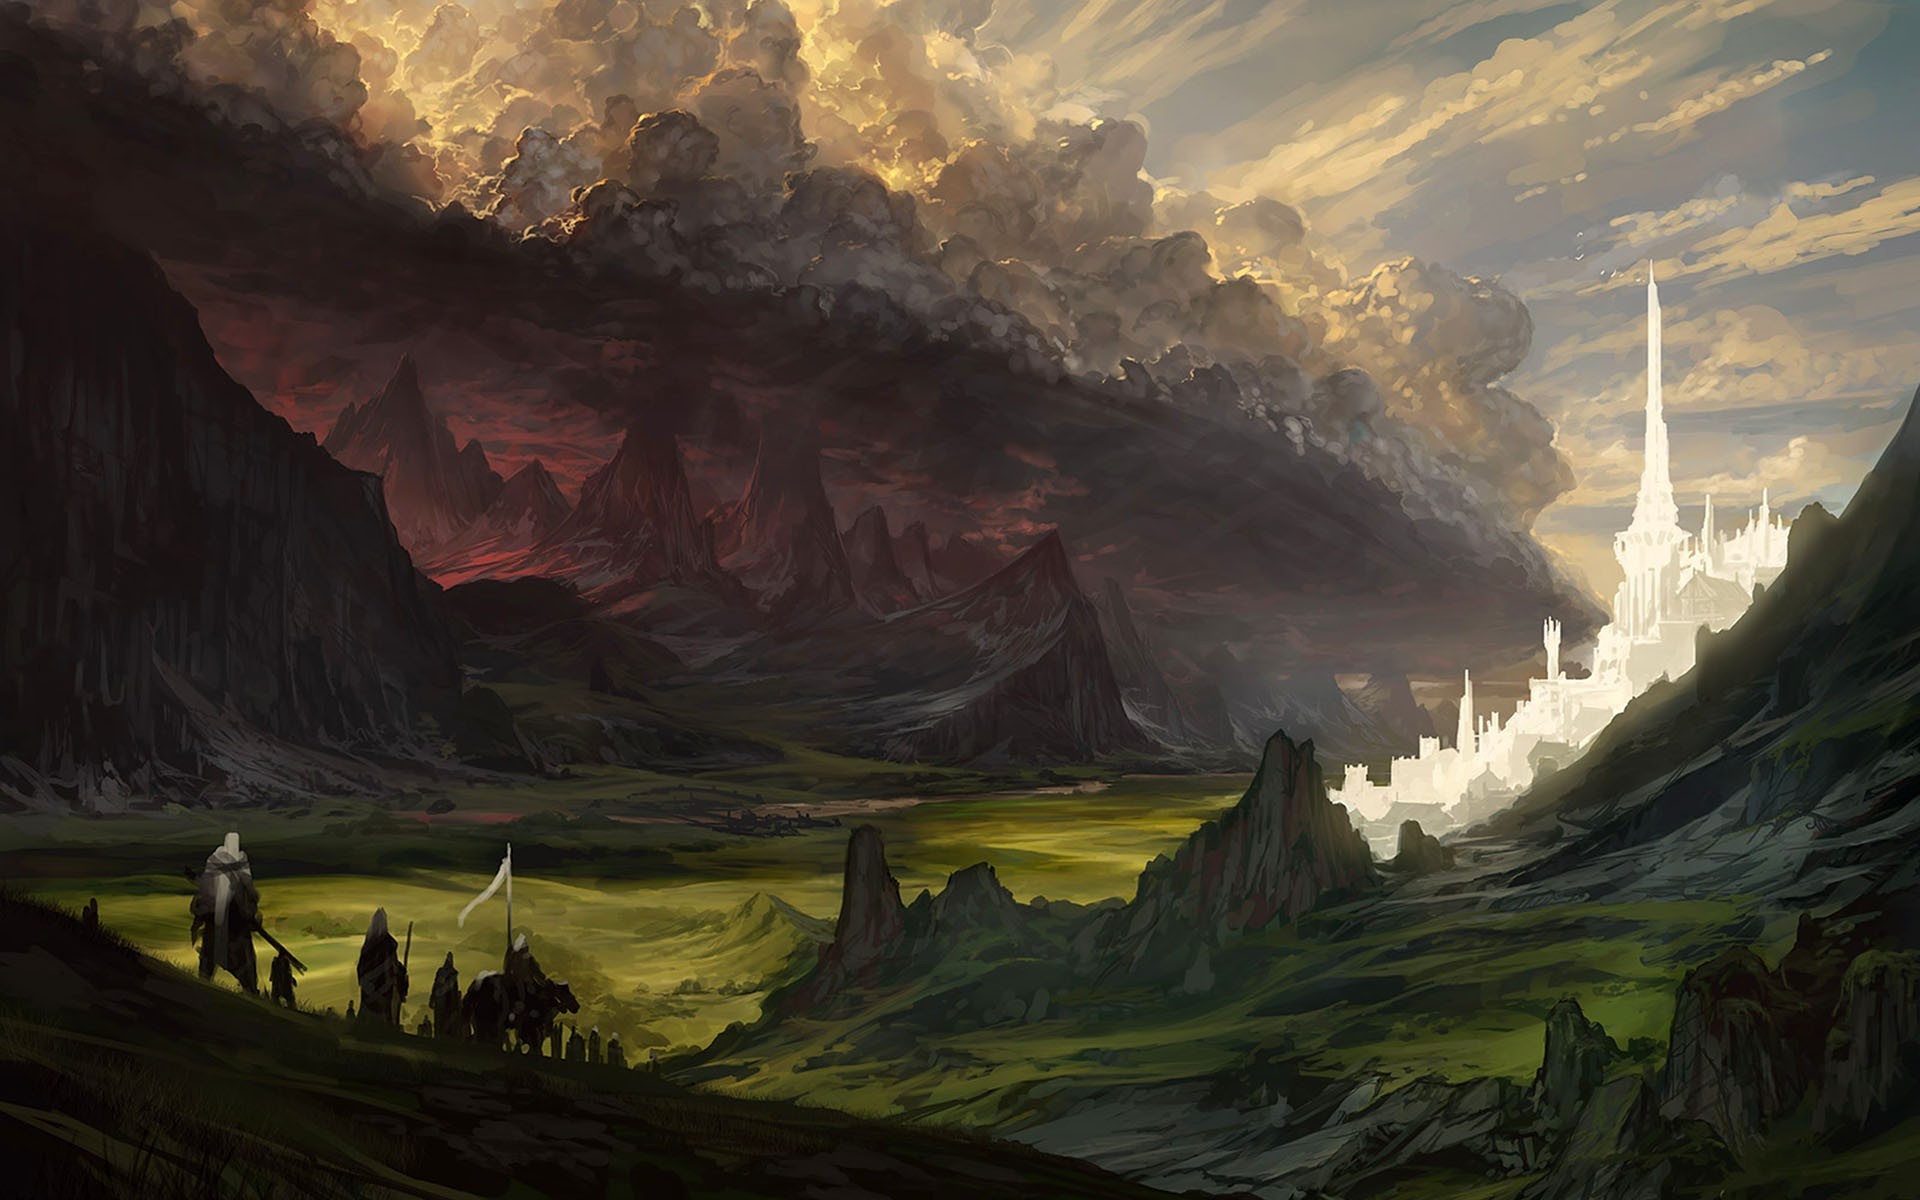 Fantasy Art The Lord Of The Rings Landscape Artwork Mordor 1920x1200